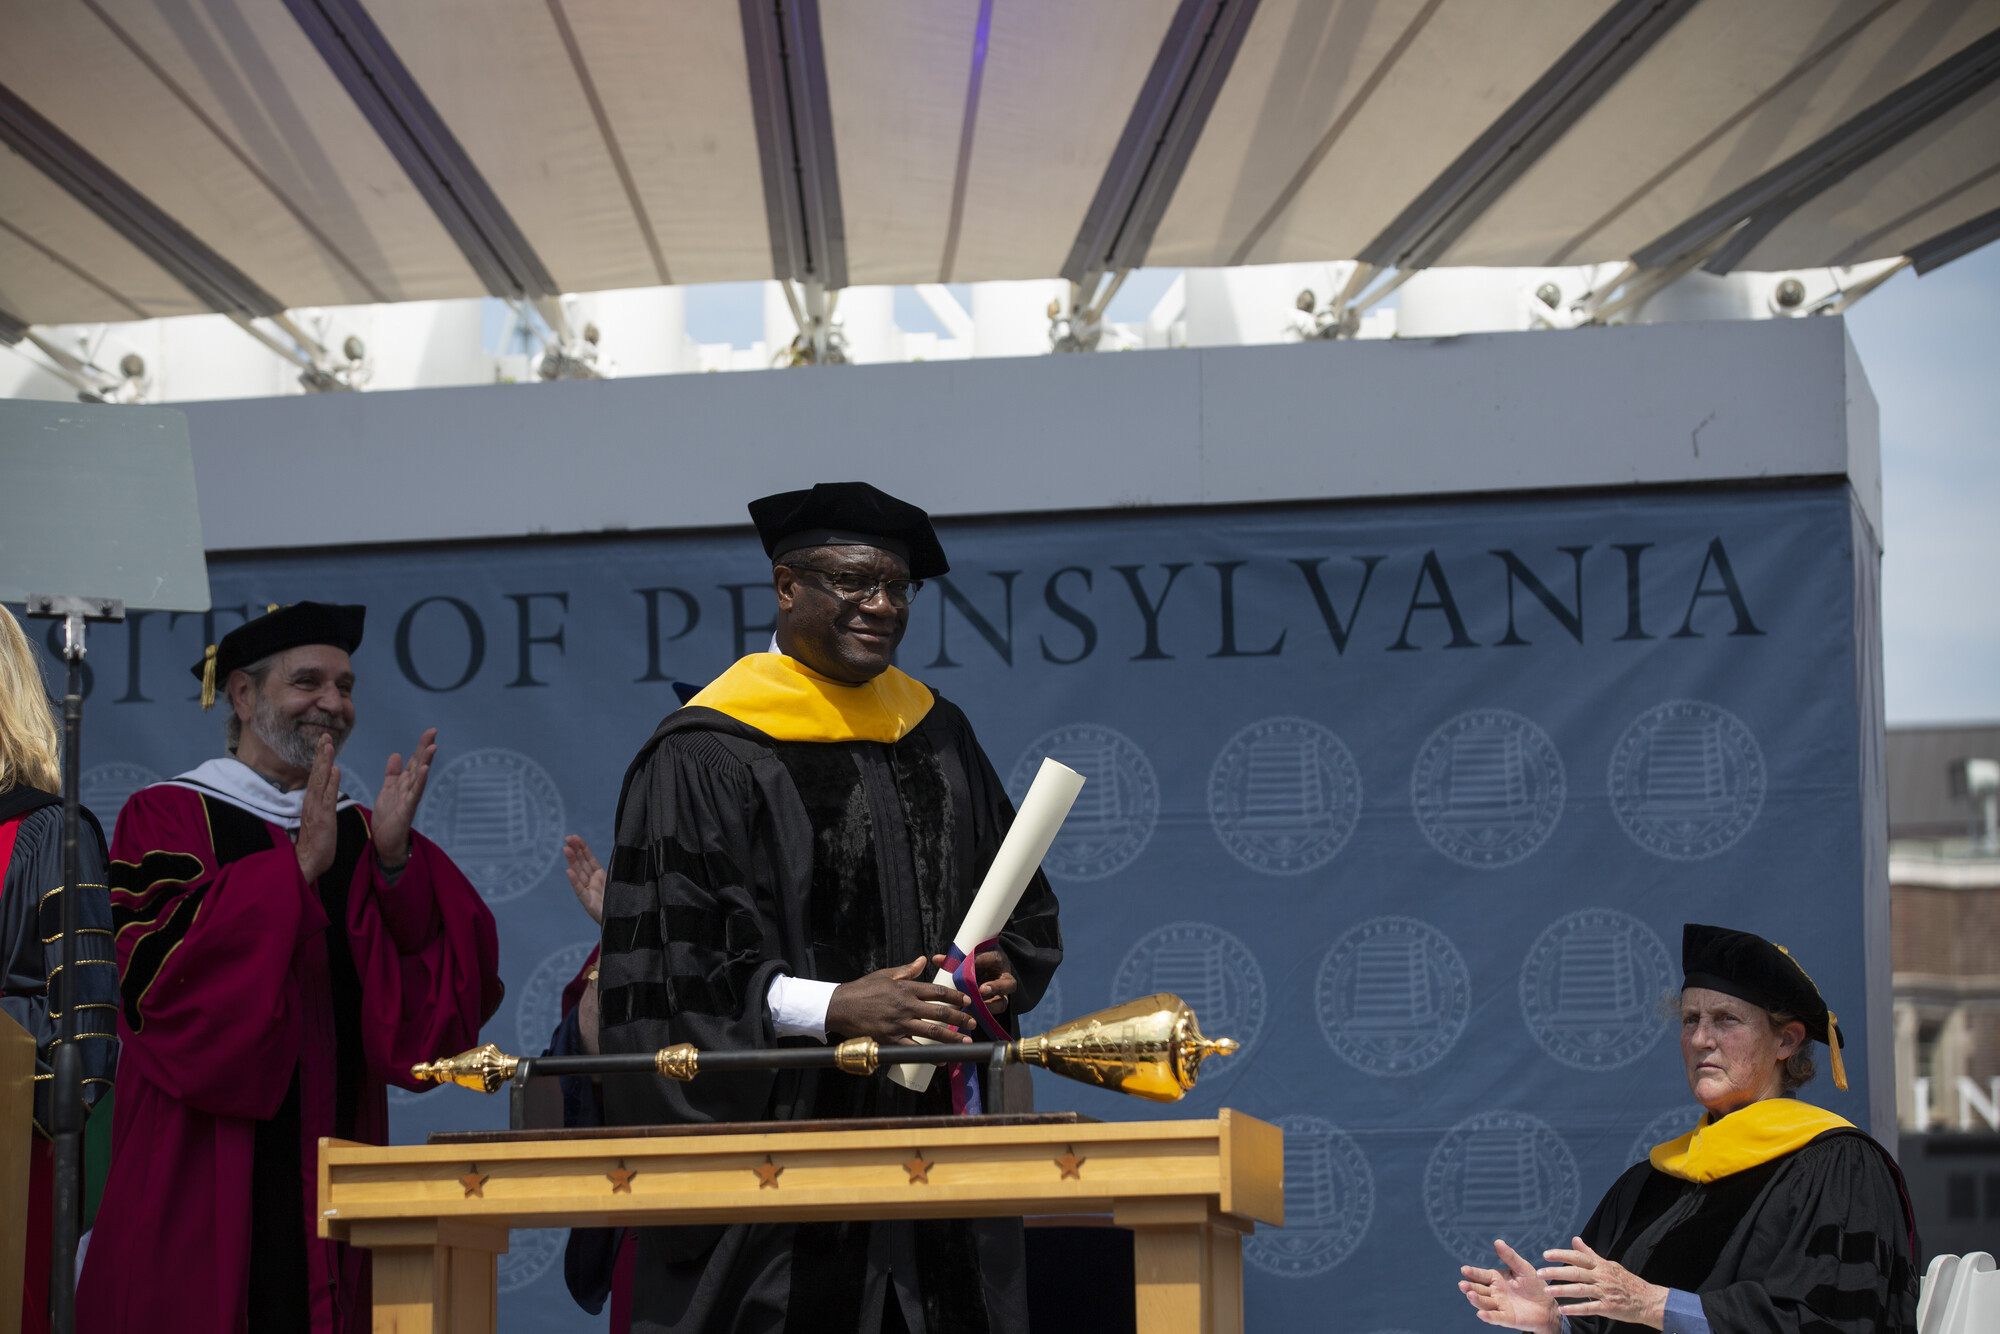 Michael Delli Carpini claps as Denis Mukwege holds his honorary degree, with Temple Grandin seated and clapping.